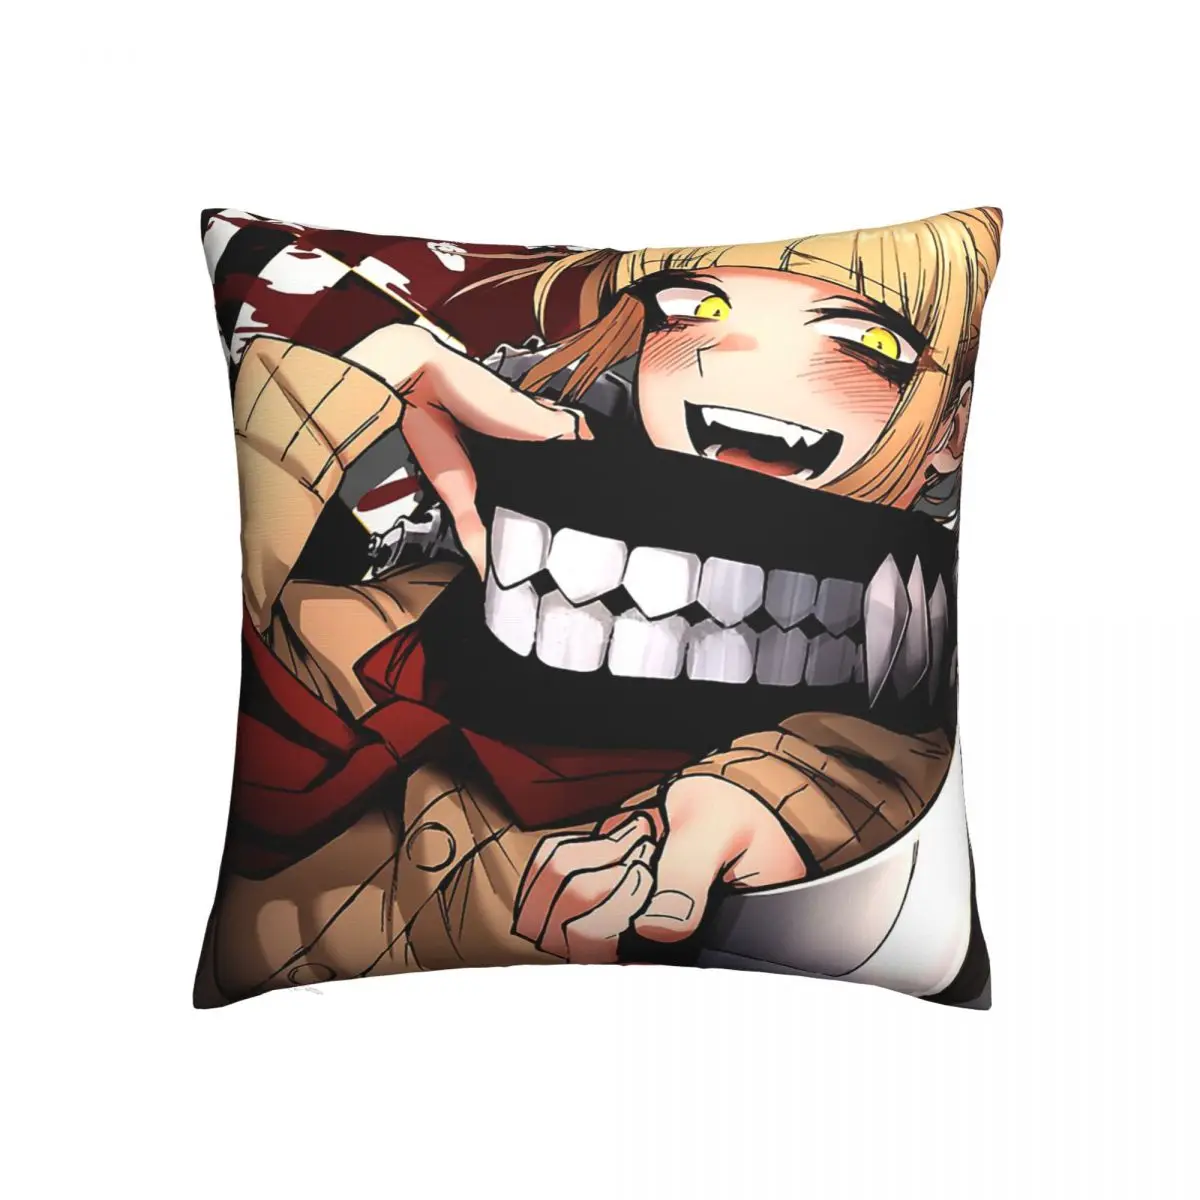 

Himiko Toga Blood Checkers Classic Throw Pillow Case My Hero Academia Short Plus Cushion Covers Home Sofa Decorative Backpack